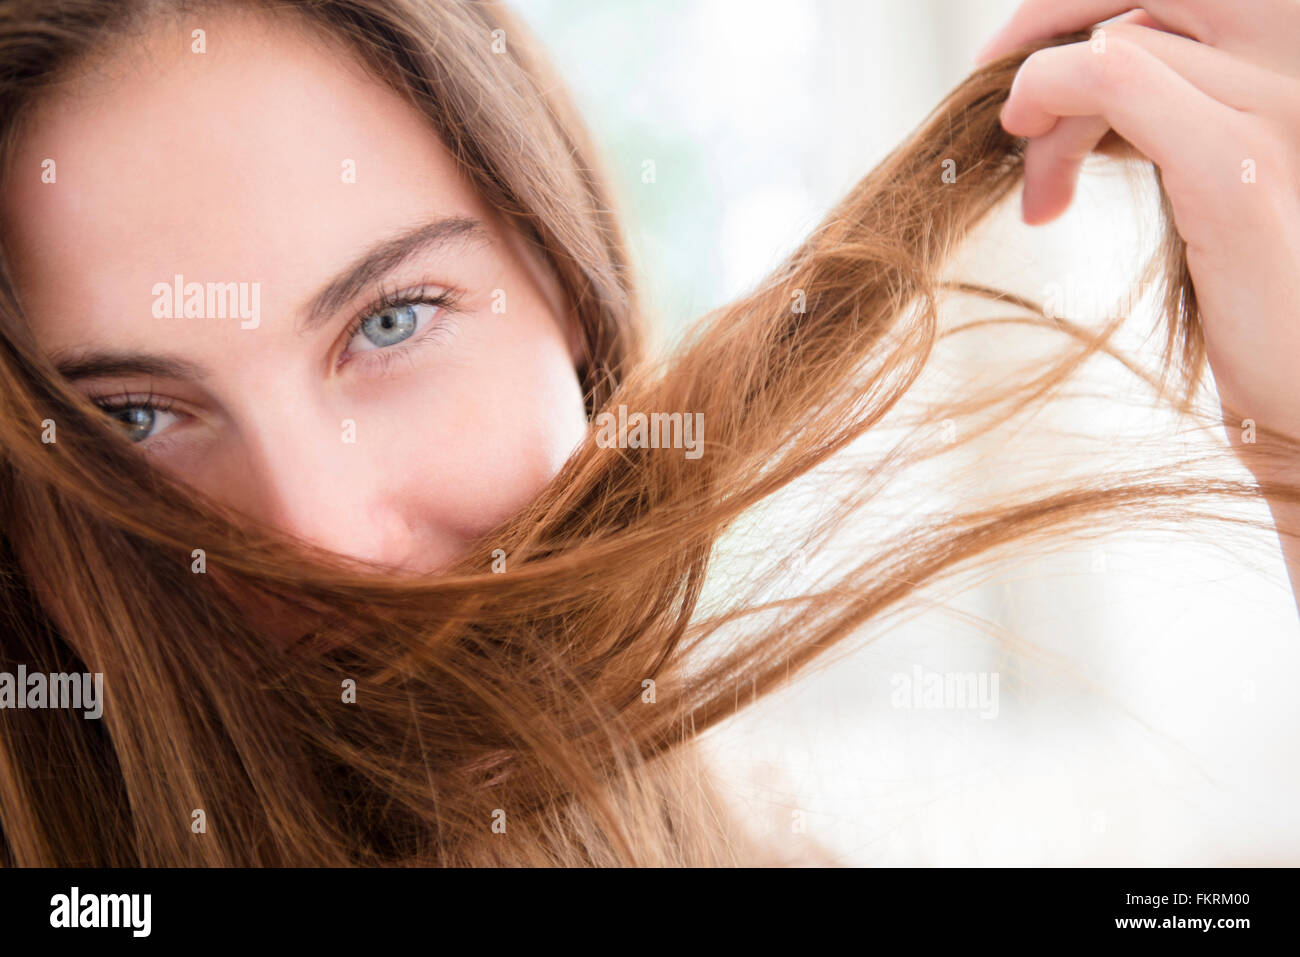 Native American woman playing with hair Stock Photo